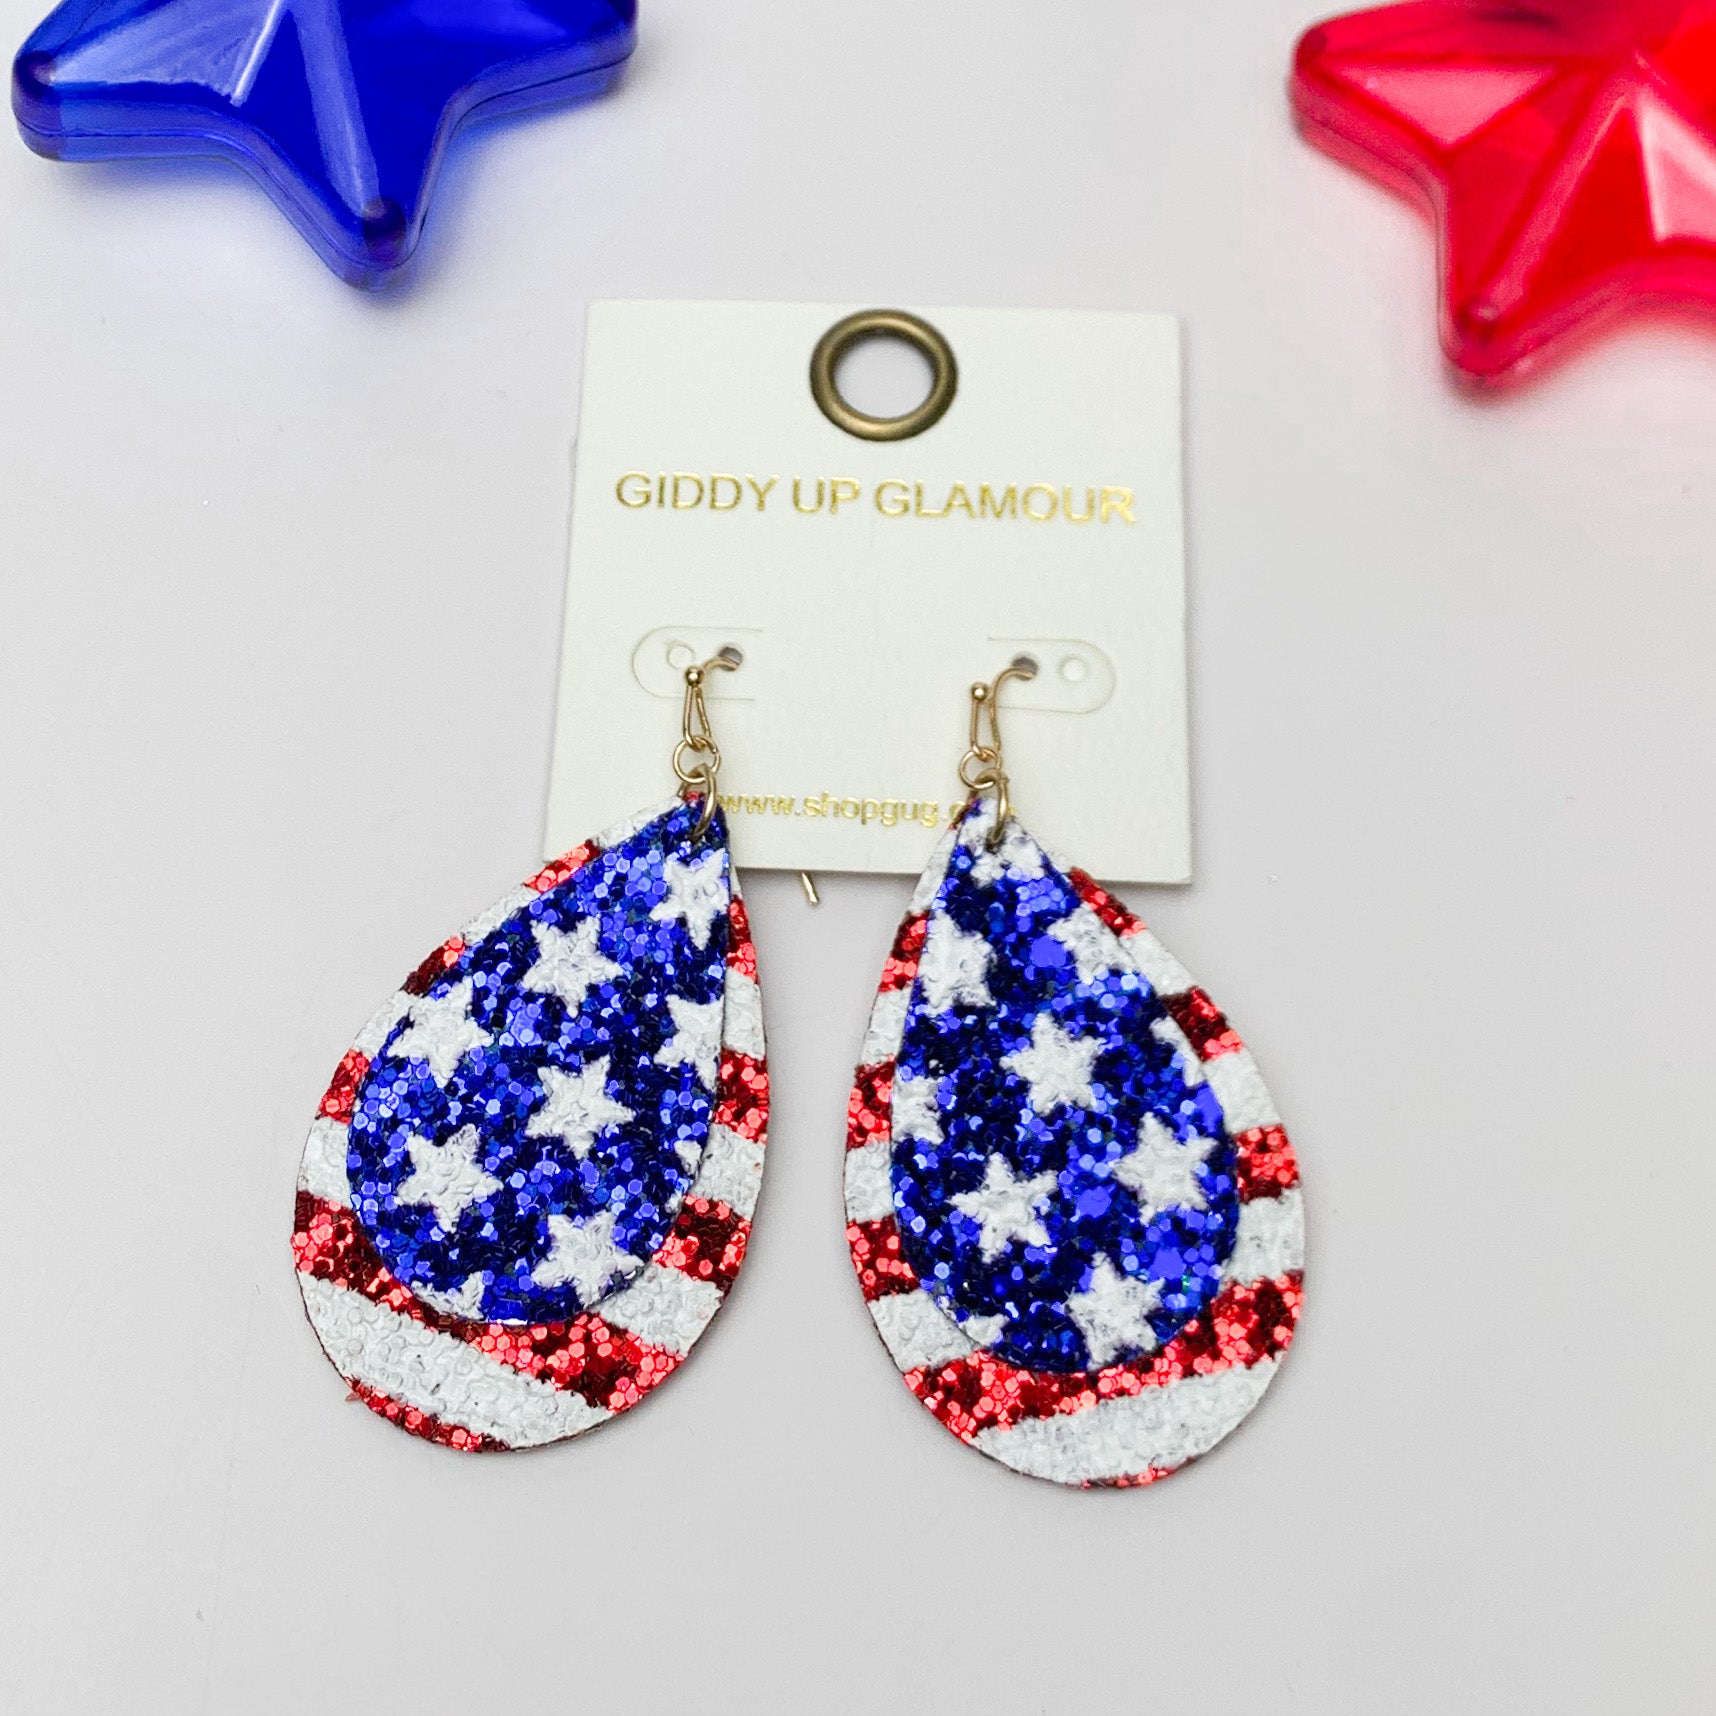 Stars And Stripes Glitter Patriotic Teardrop Earrings. Pictured on a white background with a red and star at the top for decoration.